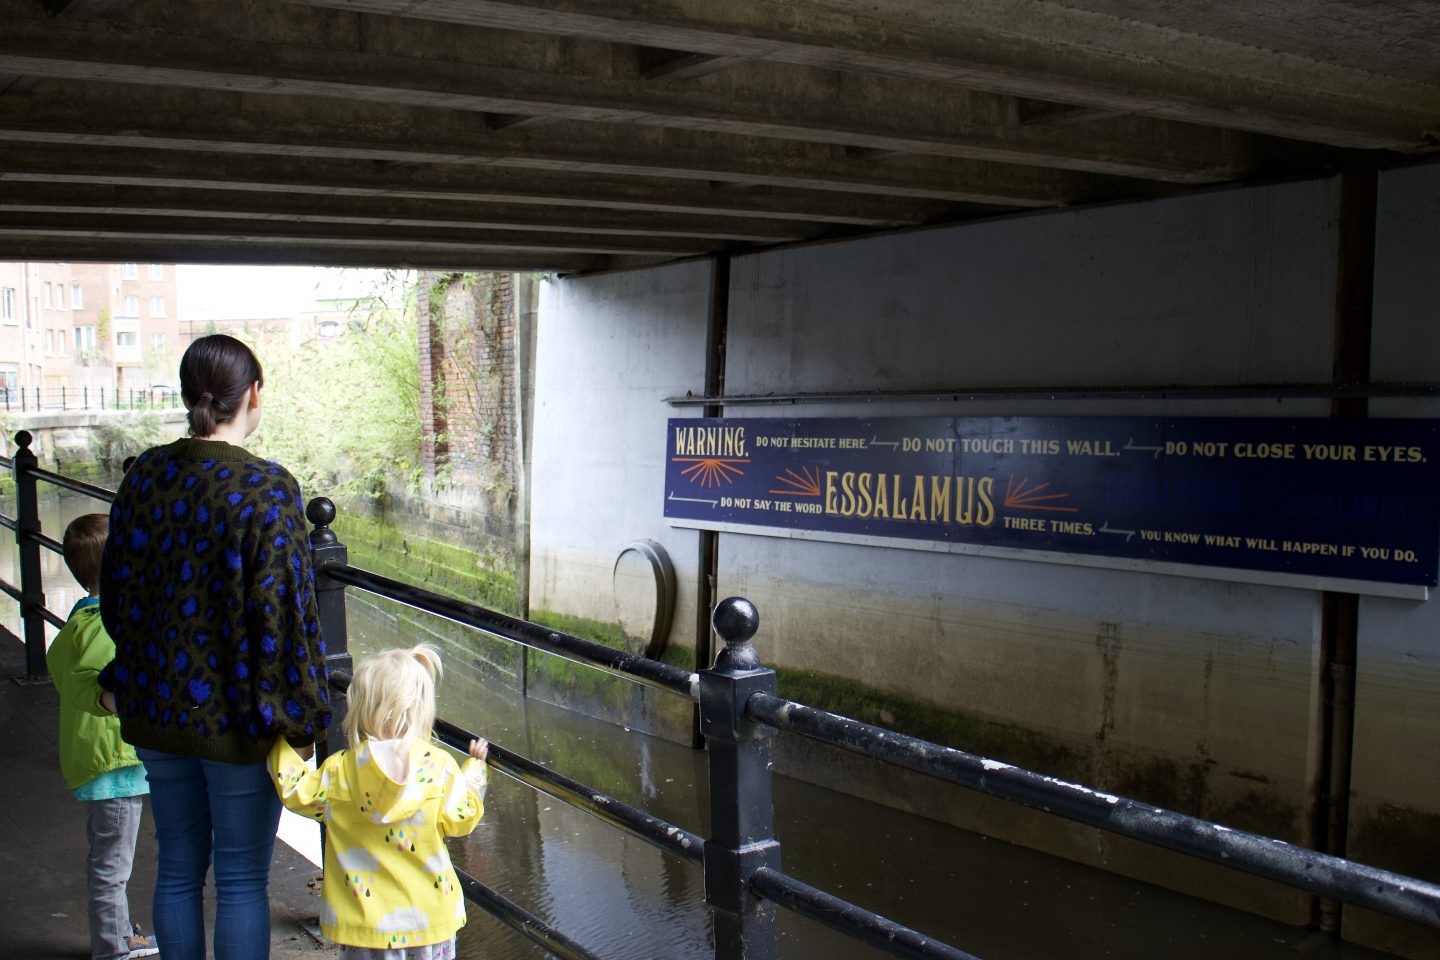 A cultural family day out at Ouseburn, Newcastle